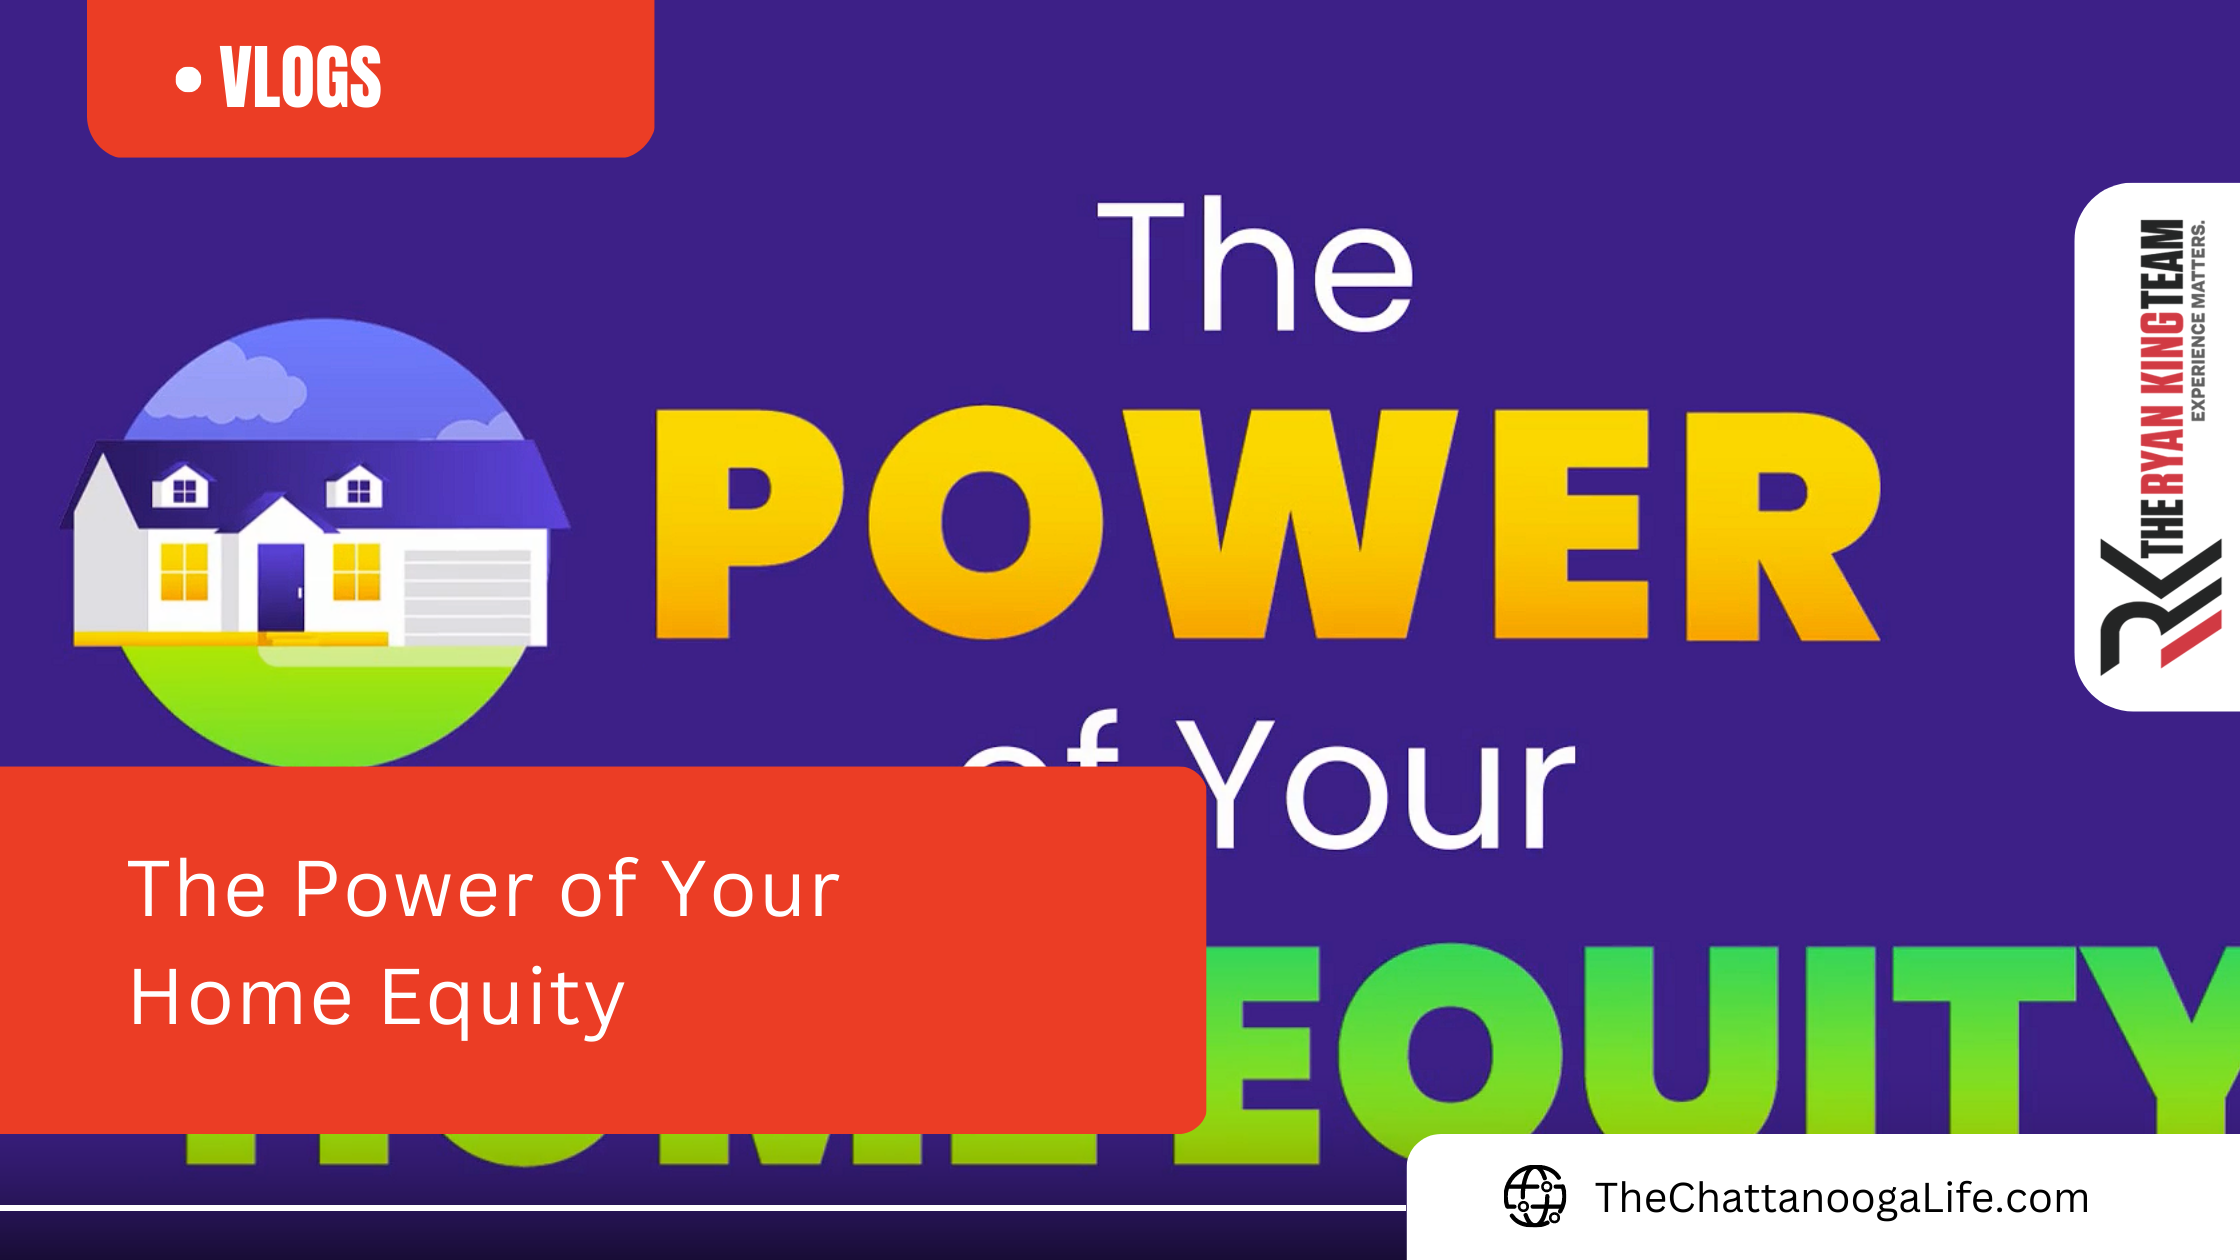 The Power of Your Home Equity